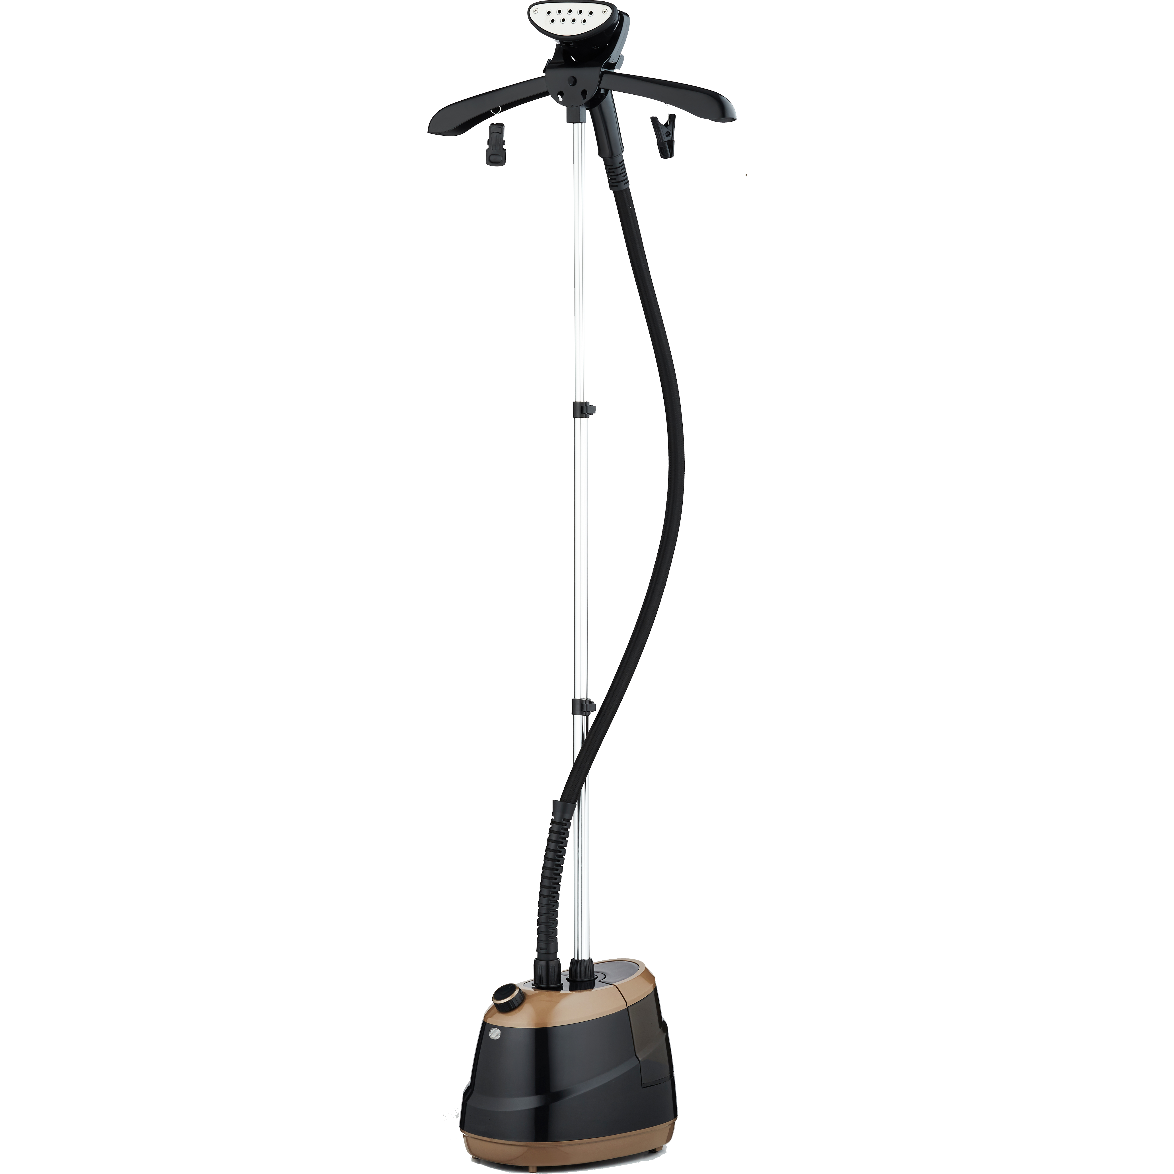 Home Electric Garment Steamer 1850W - Black and Brown HGS-410 